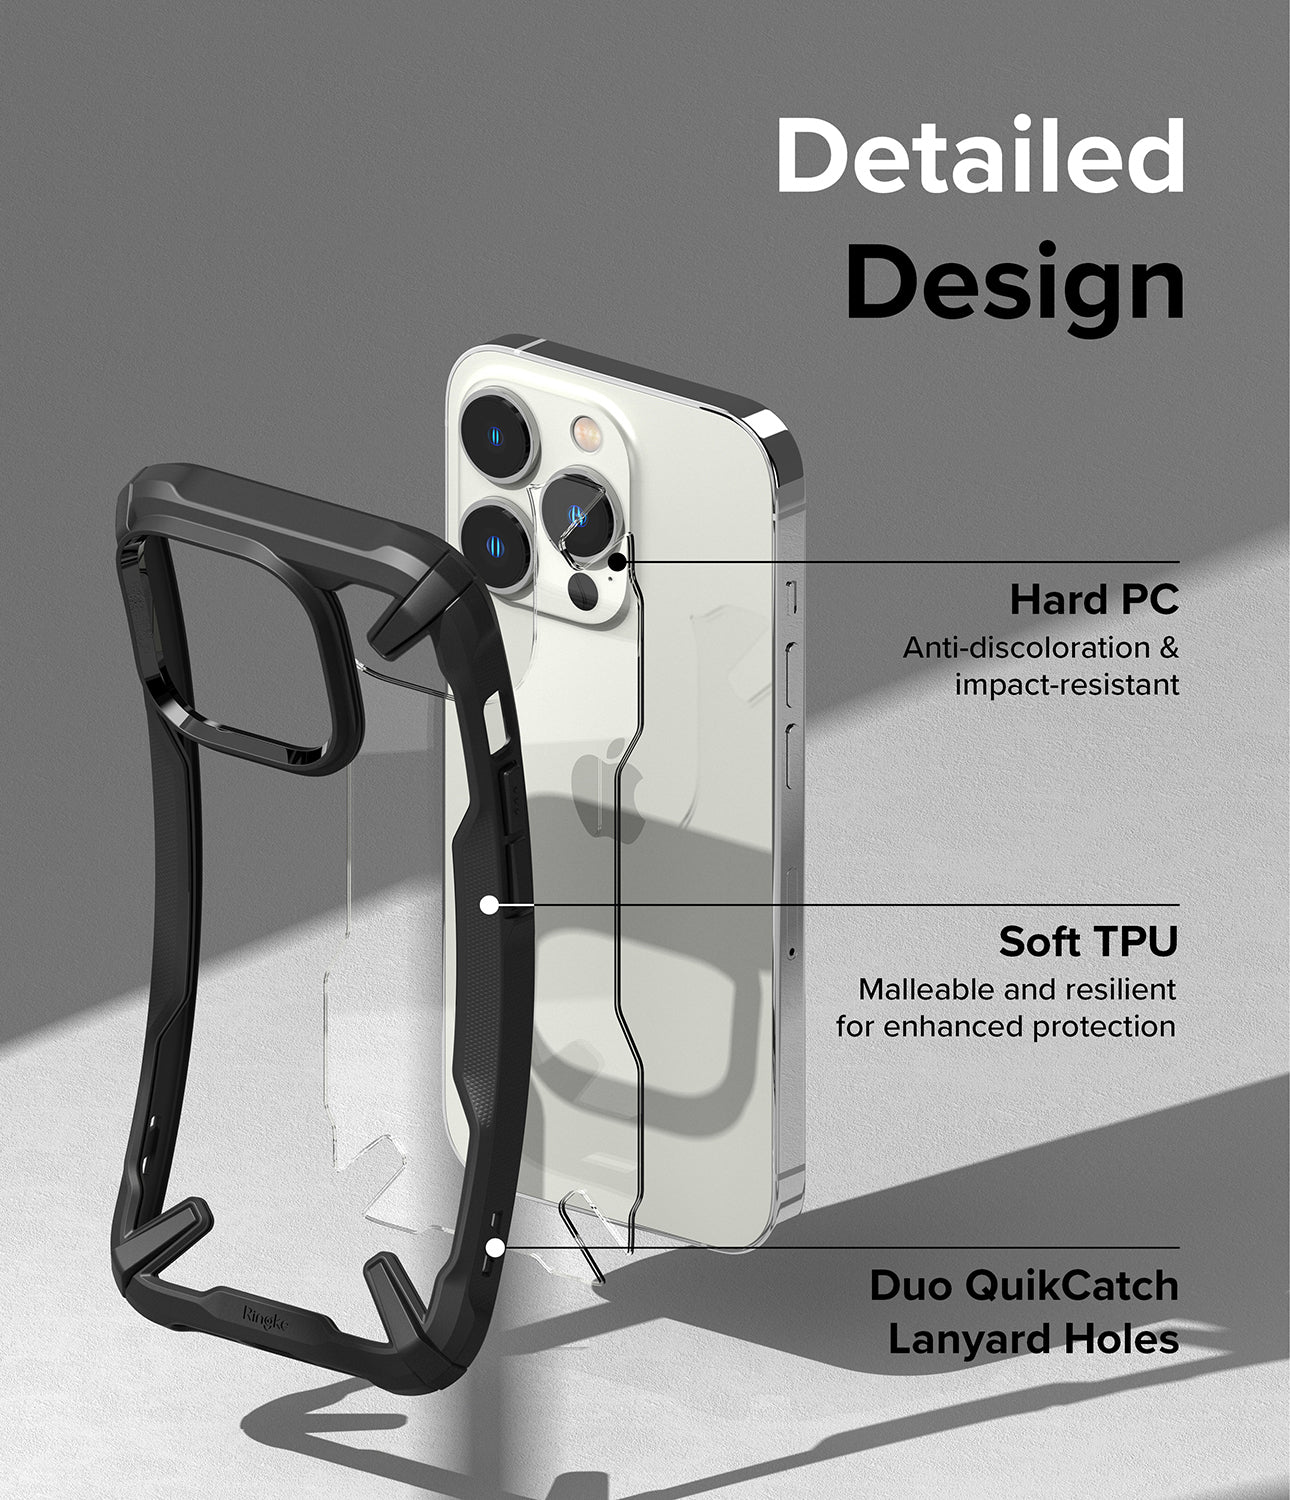 iPhone 14 Pro Max Case | Fusion-X - Black - Detailed Design. Anti-discoloration and impact-resistant. Hard PC. Malleable and resilient for enhanced protection with Soft TPU. Duo QuikCatch Lanyard Holes.